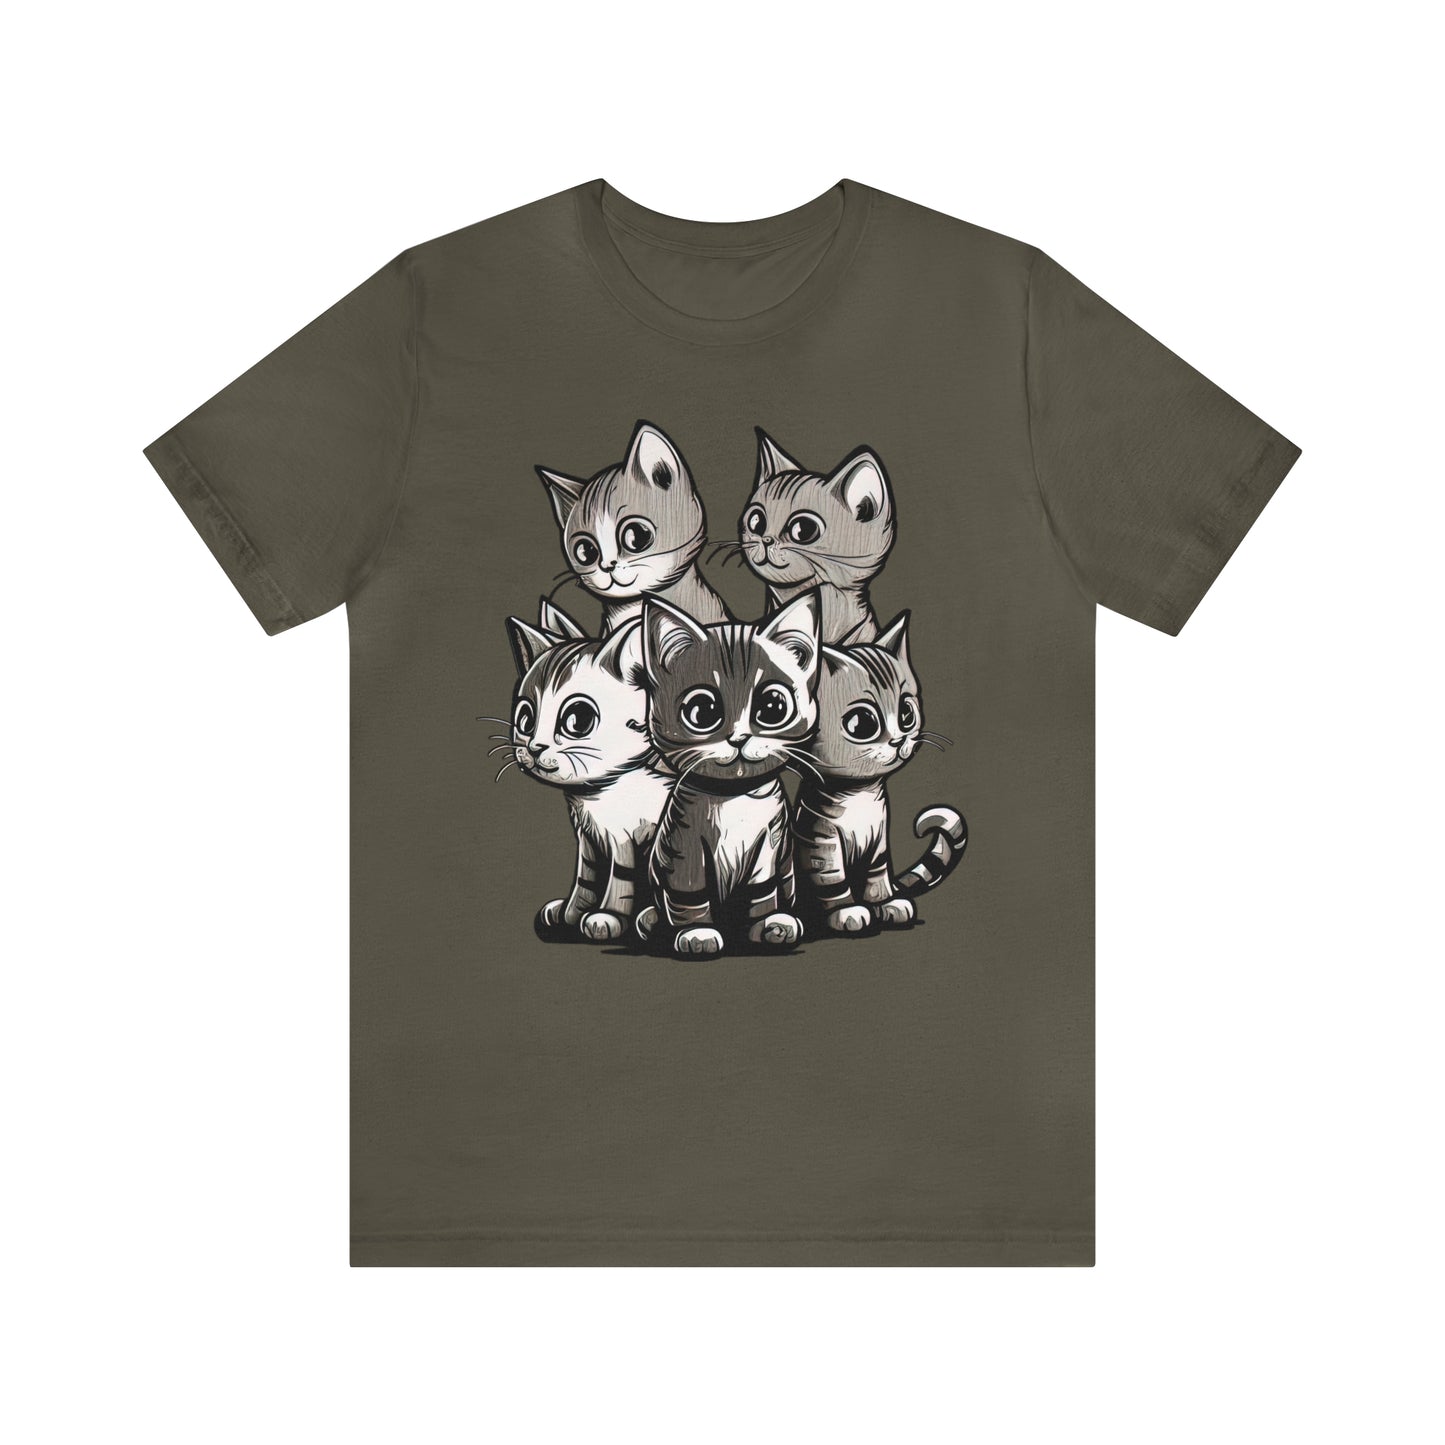 psychedelicBRANDz's Nocturnal Whisker Symphony featuring a group of cats on an army shirt